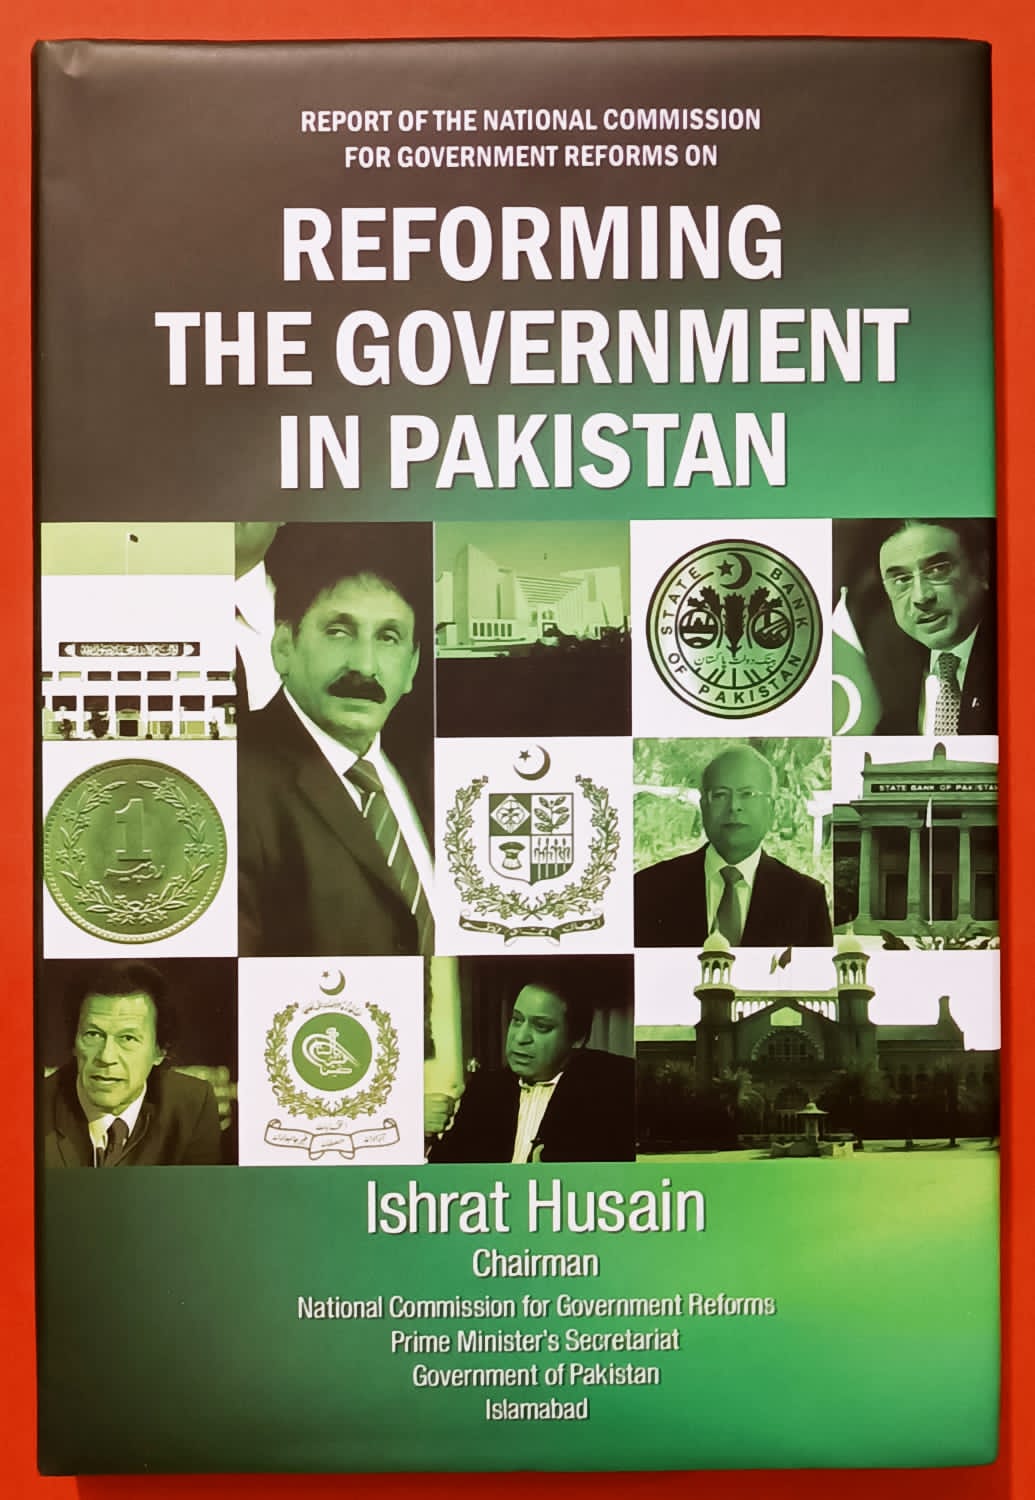 REFORMING THE GOVERNMENT IN PAKISTAN